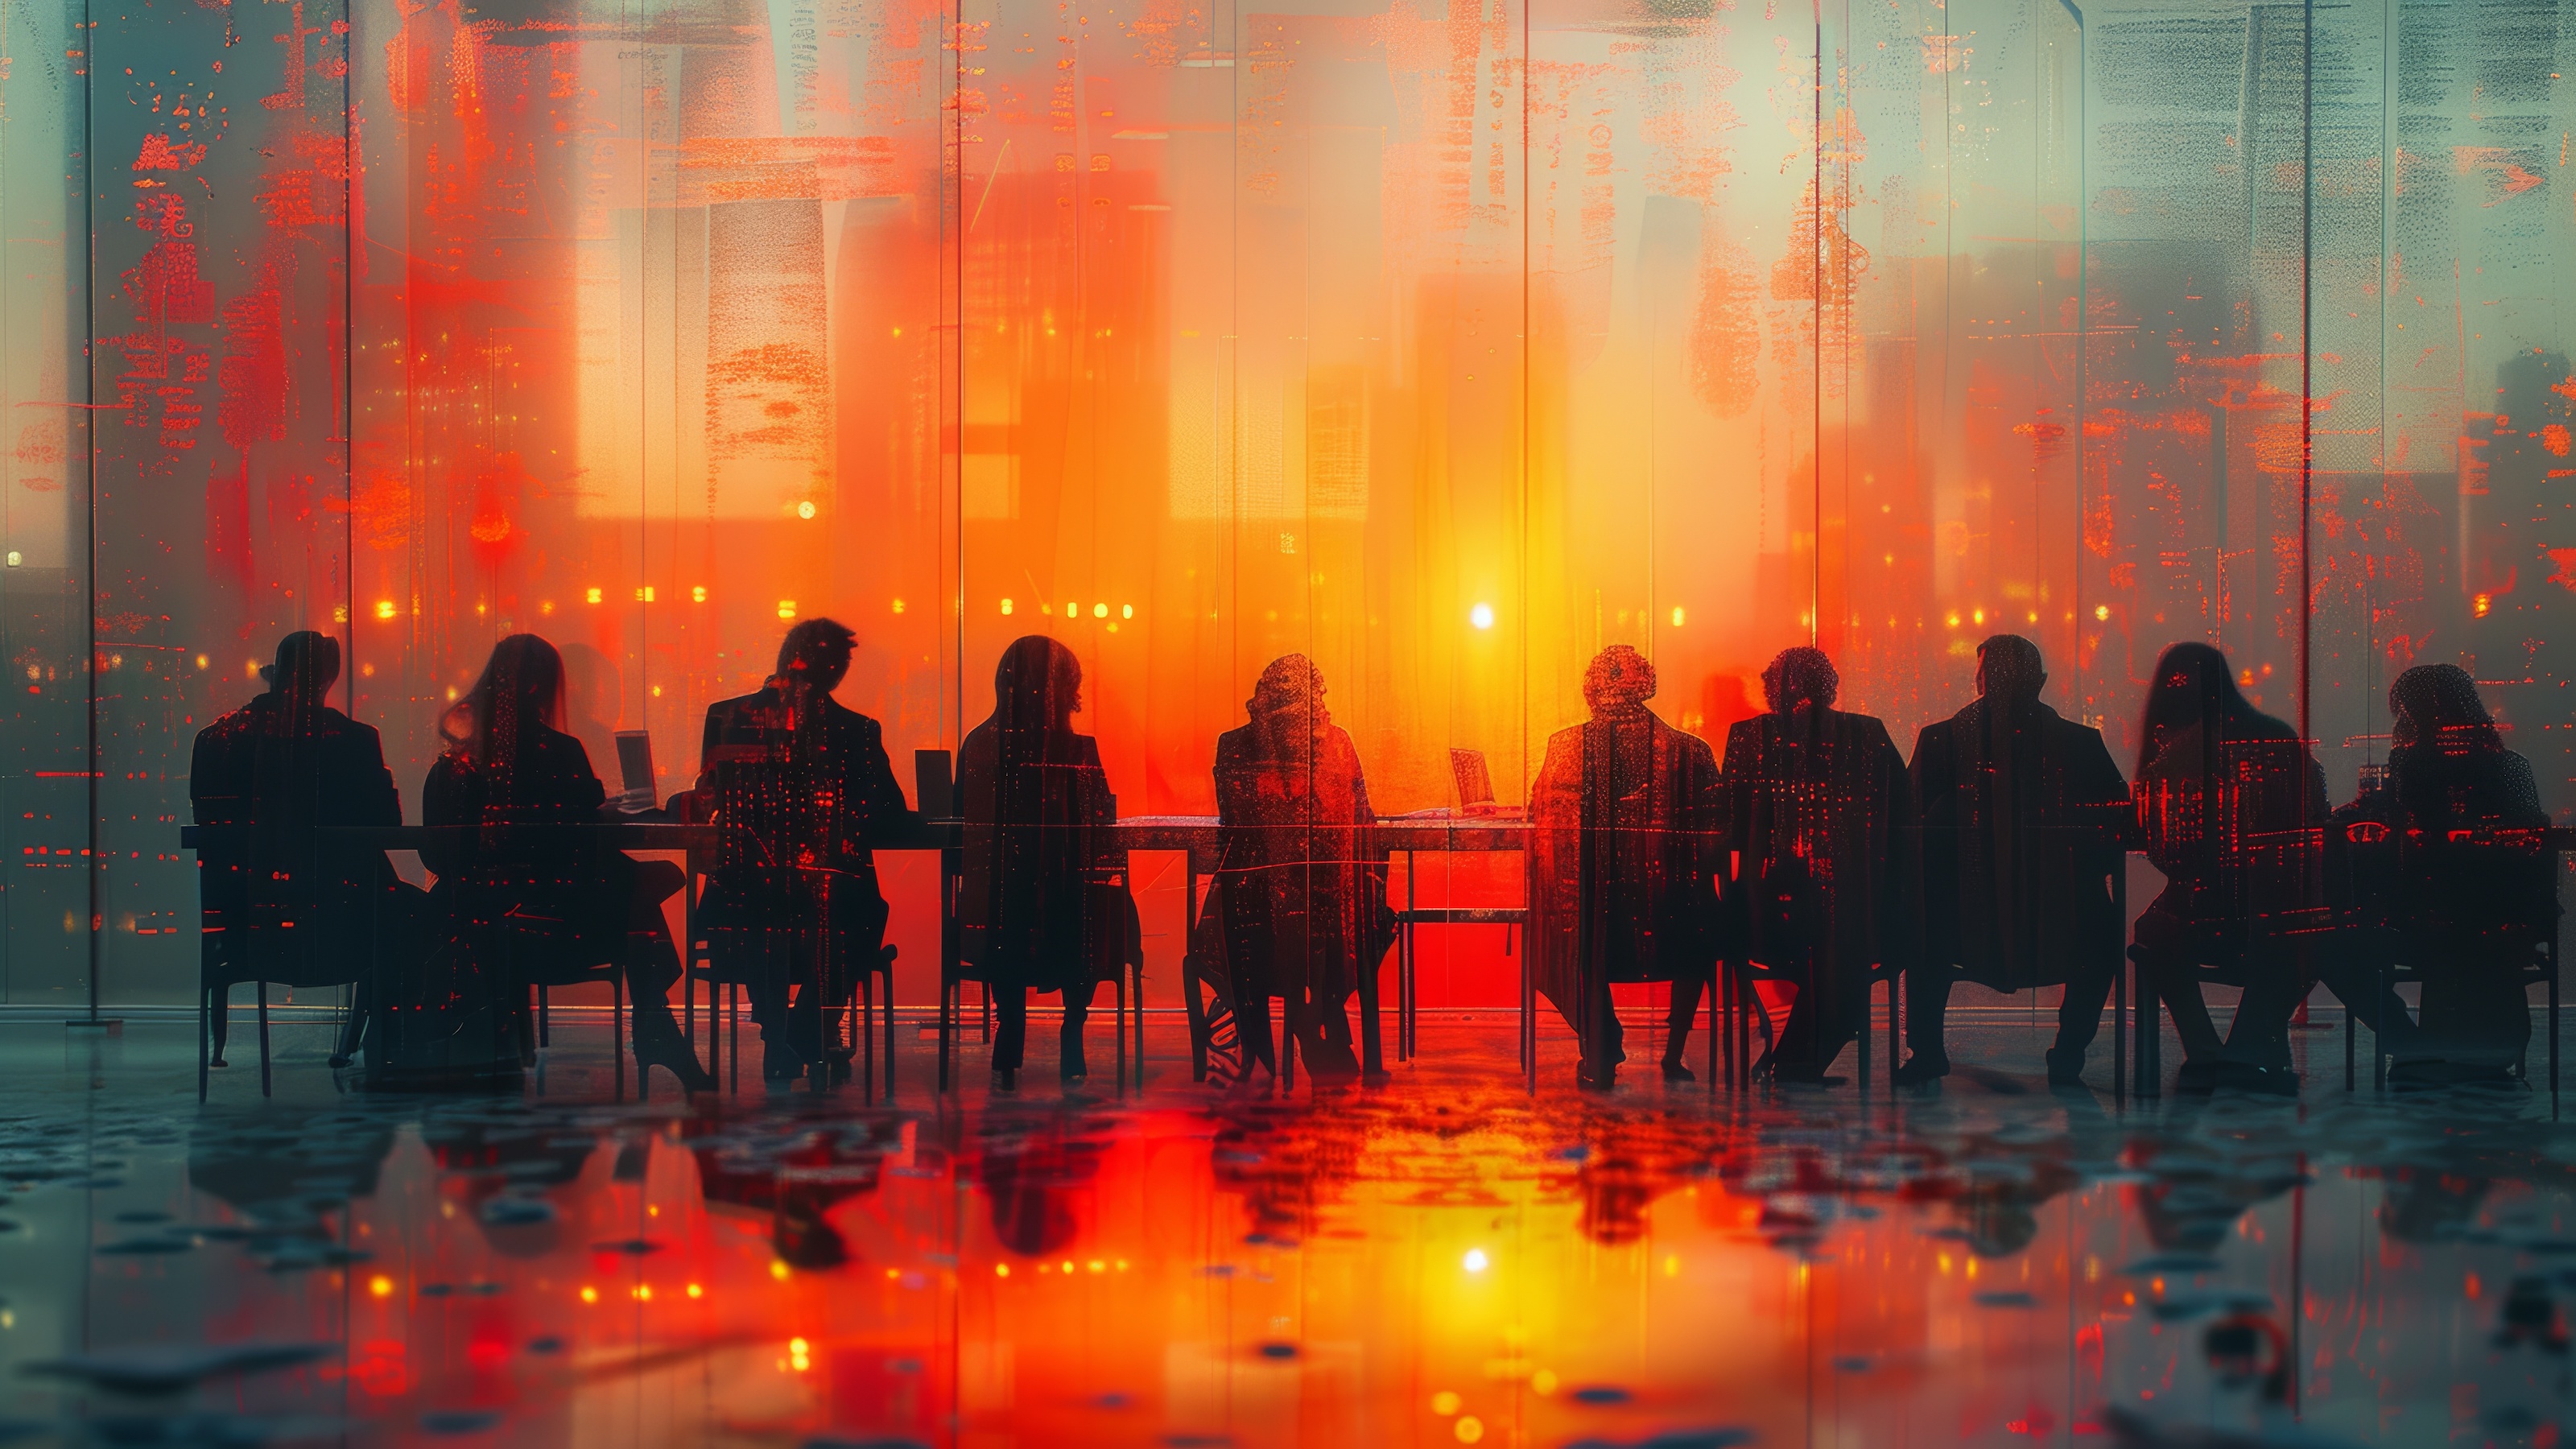 Silhouettes of people sitting at a conference table with a cityscape and vibrant sunset in the background, creating a dramatic contrast with abstract reflections on the floor, hinting at the profound AI business impact shaping their discussion.